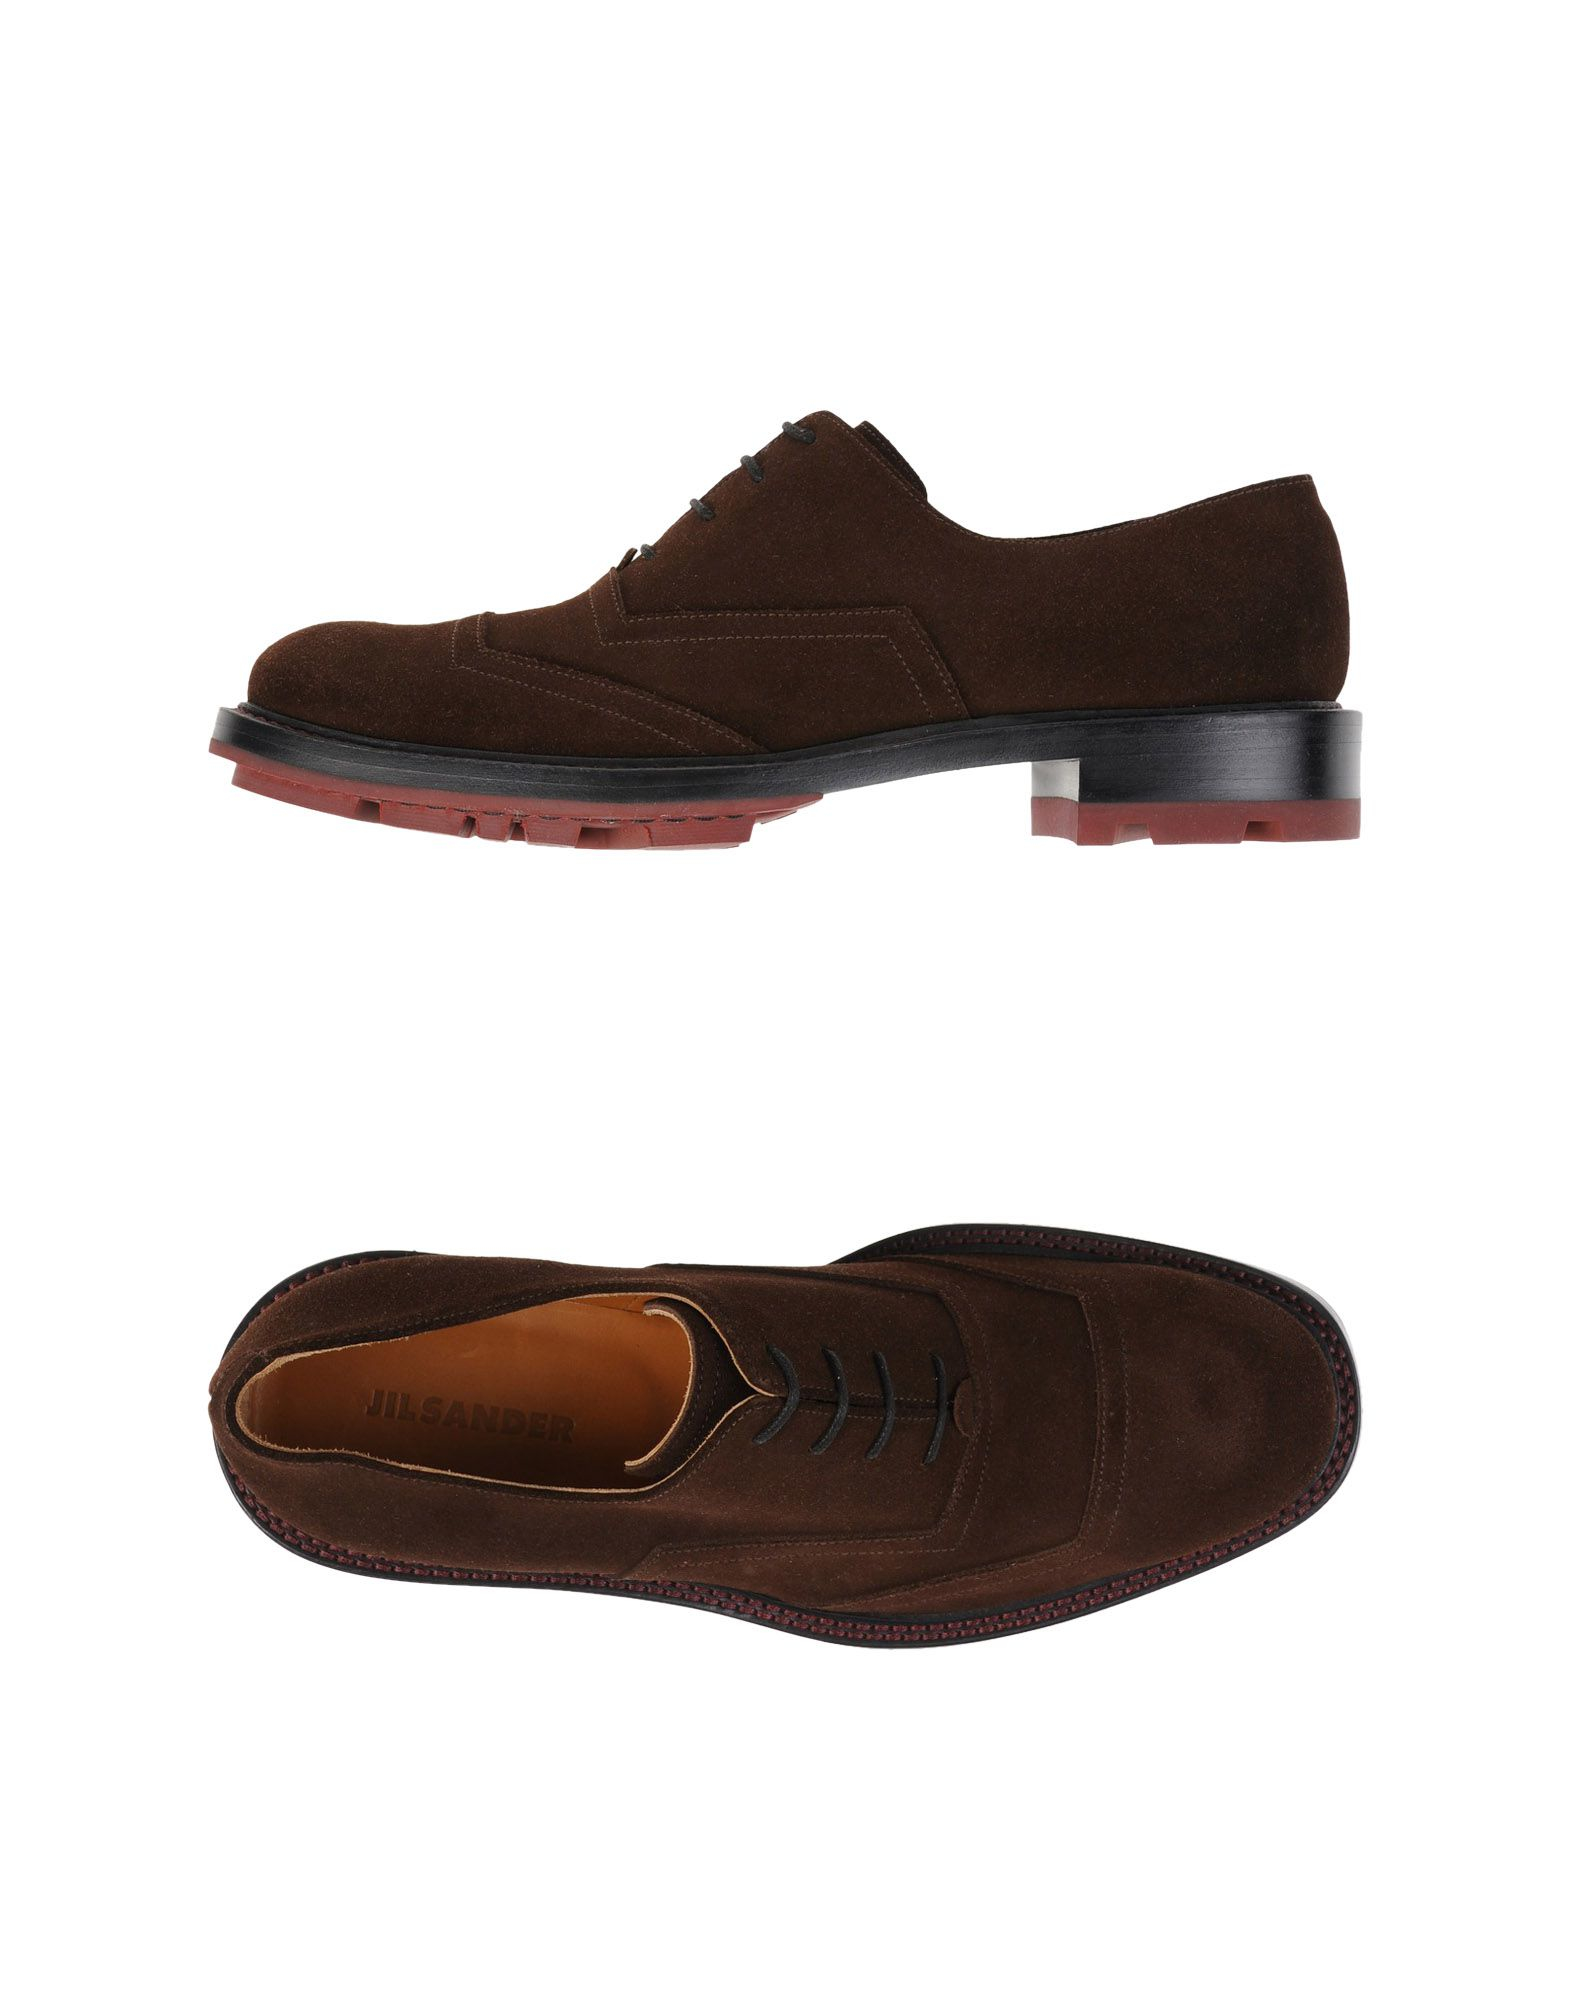 Lyst Jil Sander Laceup Shoes in Brown for Men